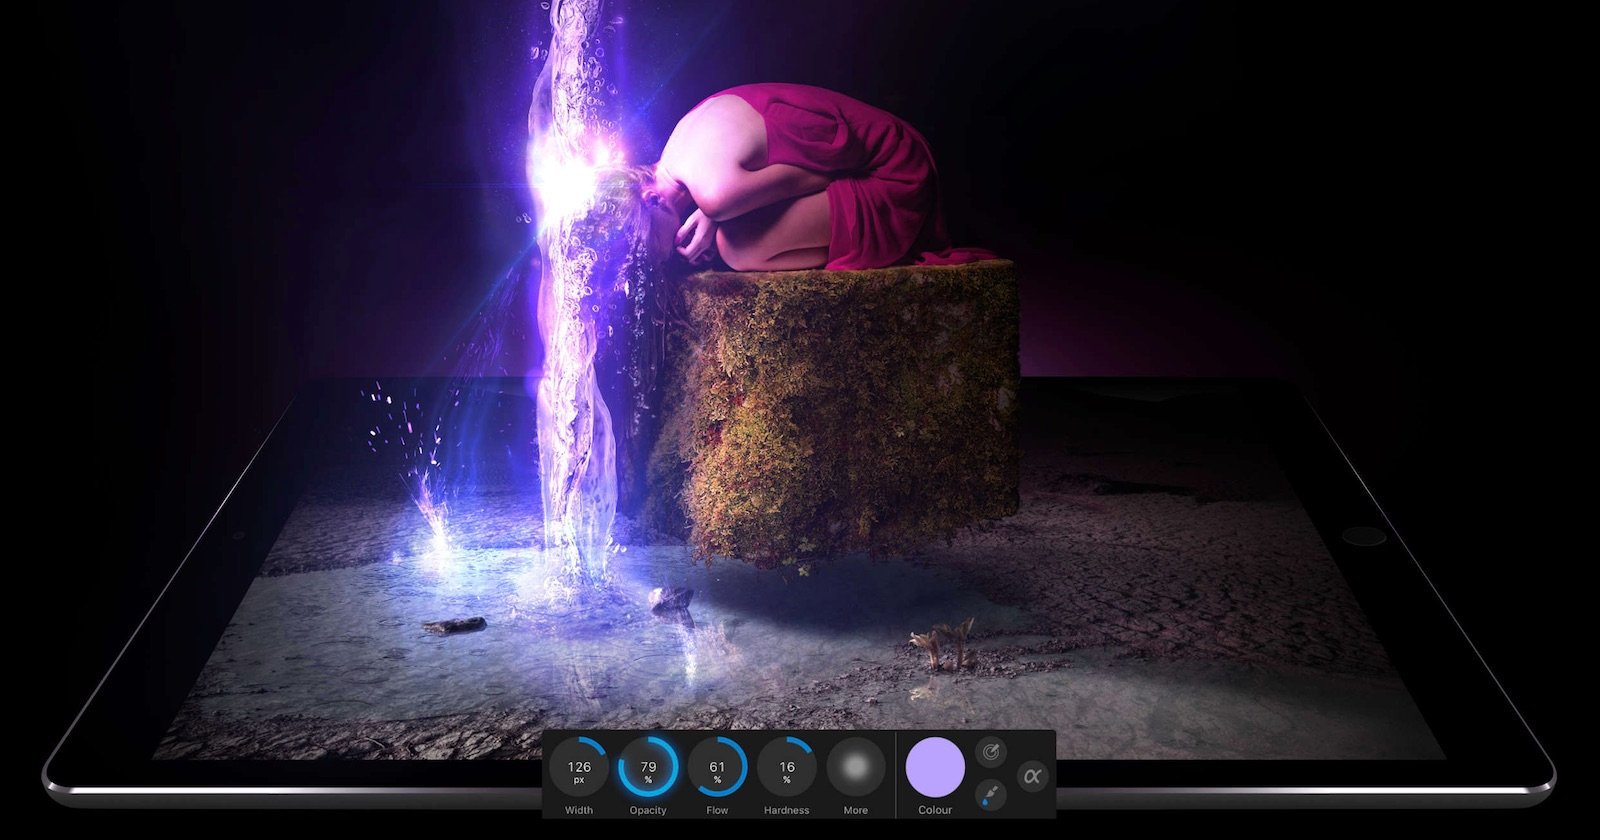 Affinity Photo Comes to iPad: The First Full-Powered Photo Editor on a Tablet